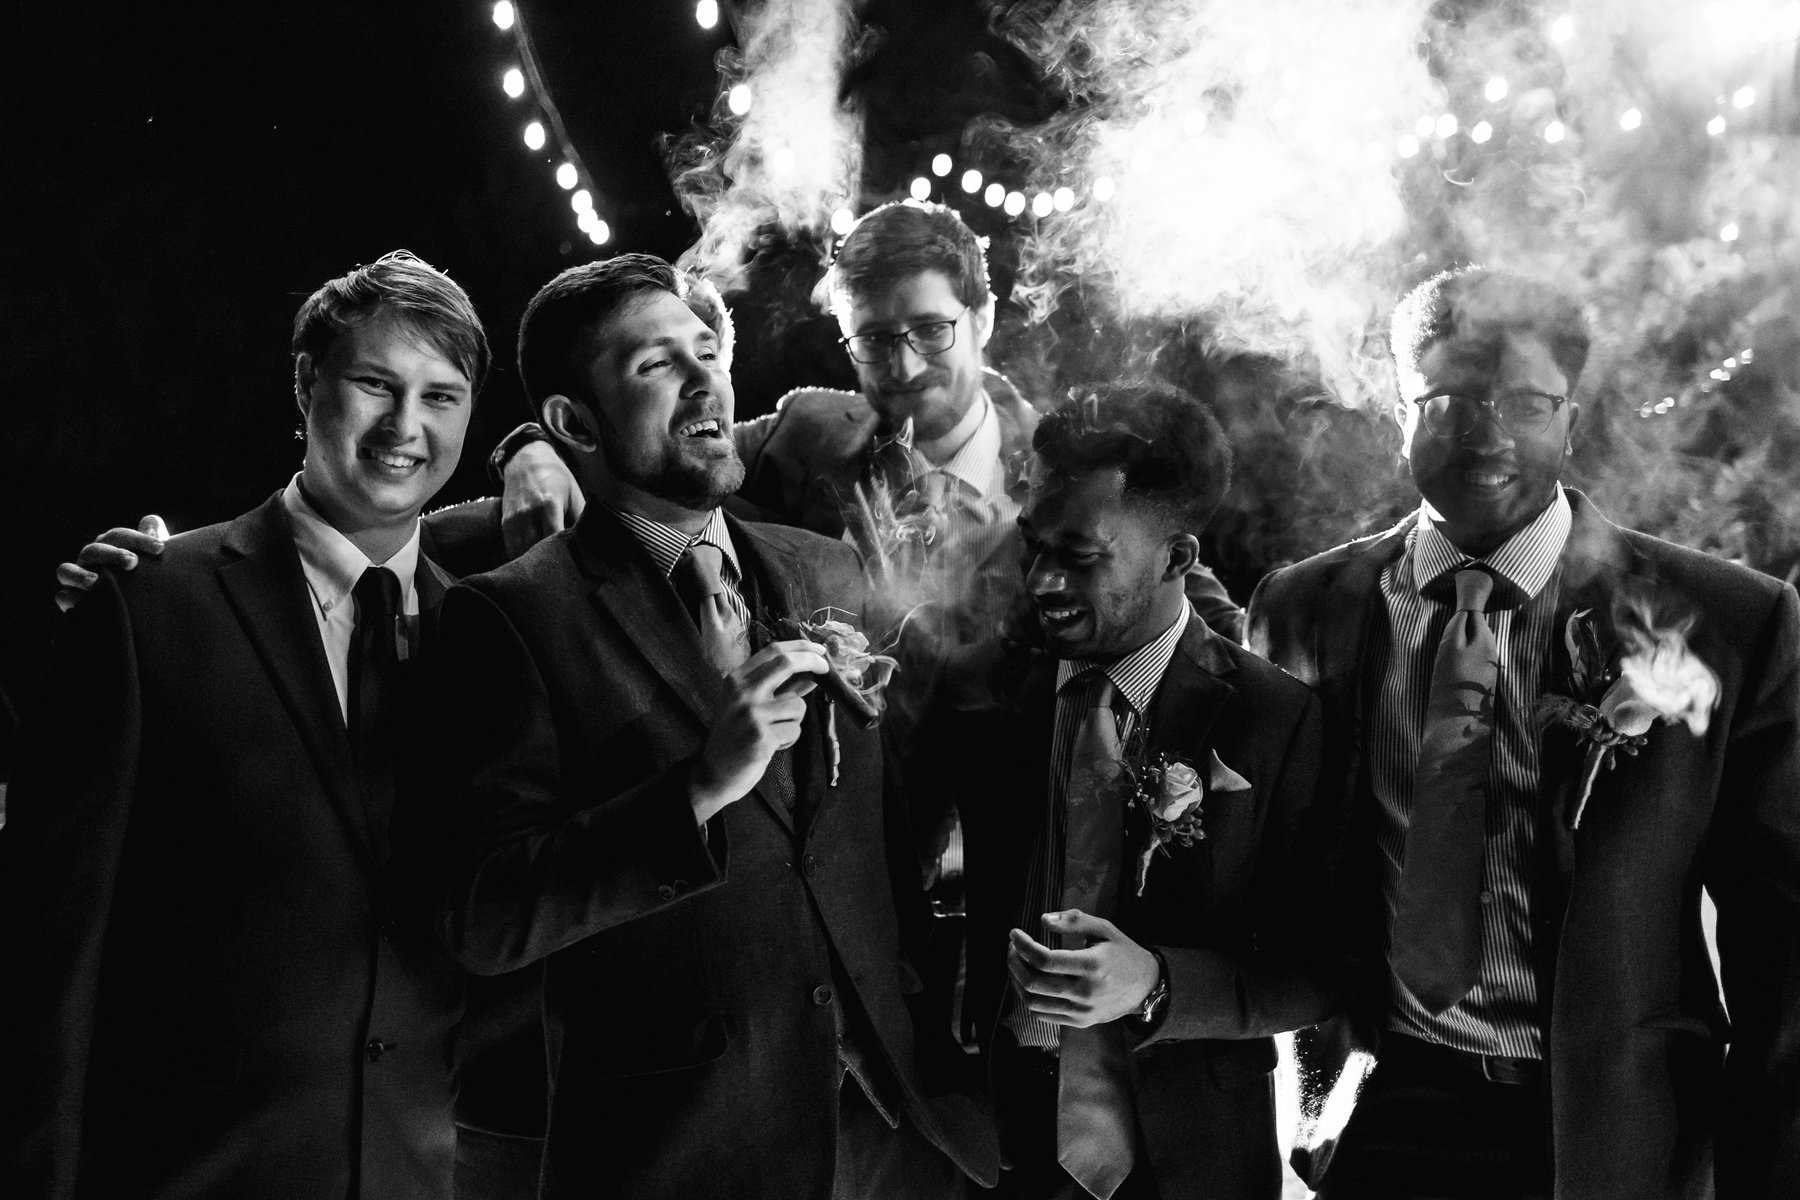 A black and white photo of a group of groomsmen smoking cigars.